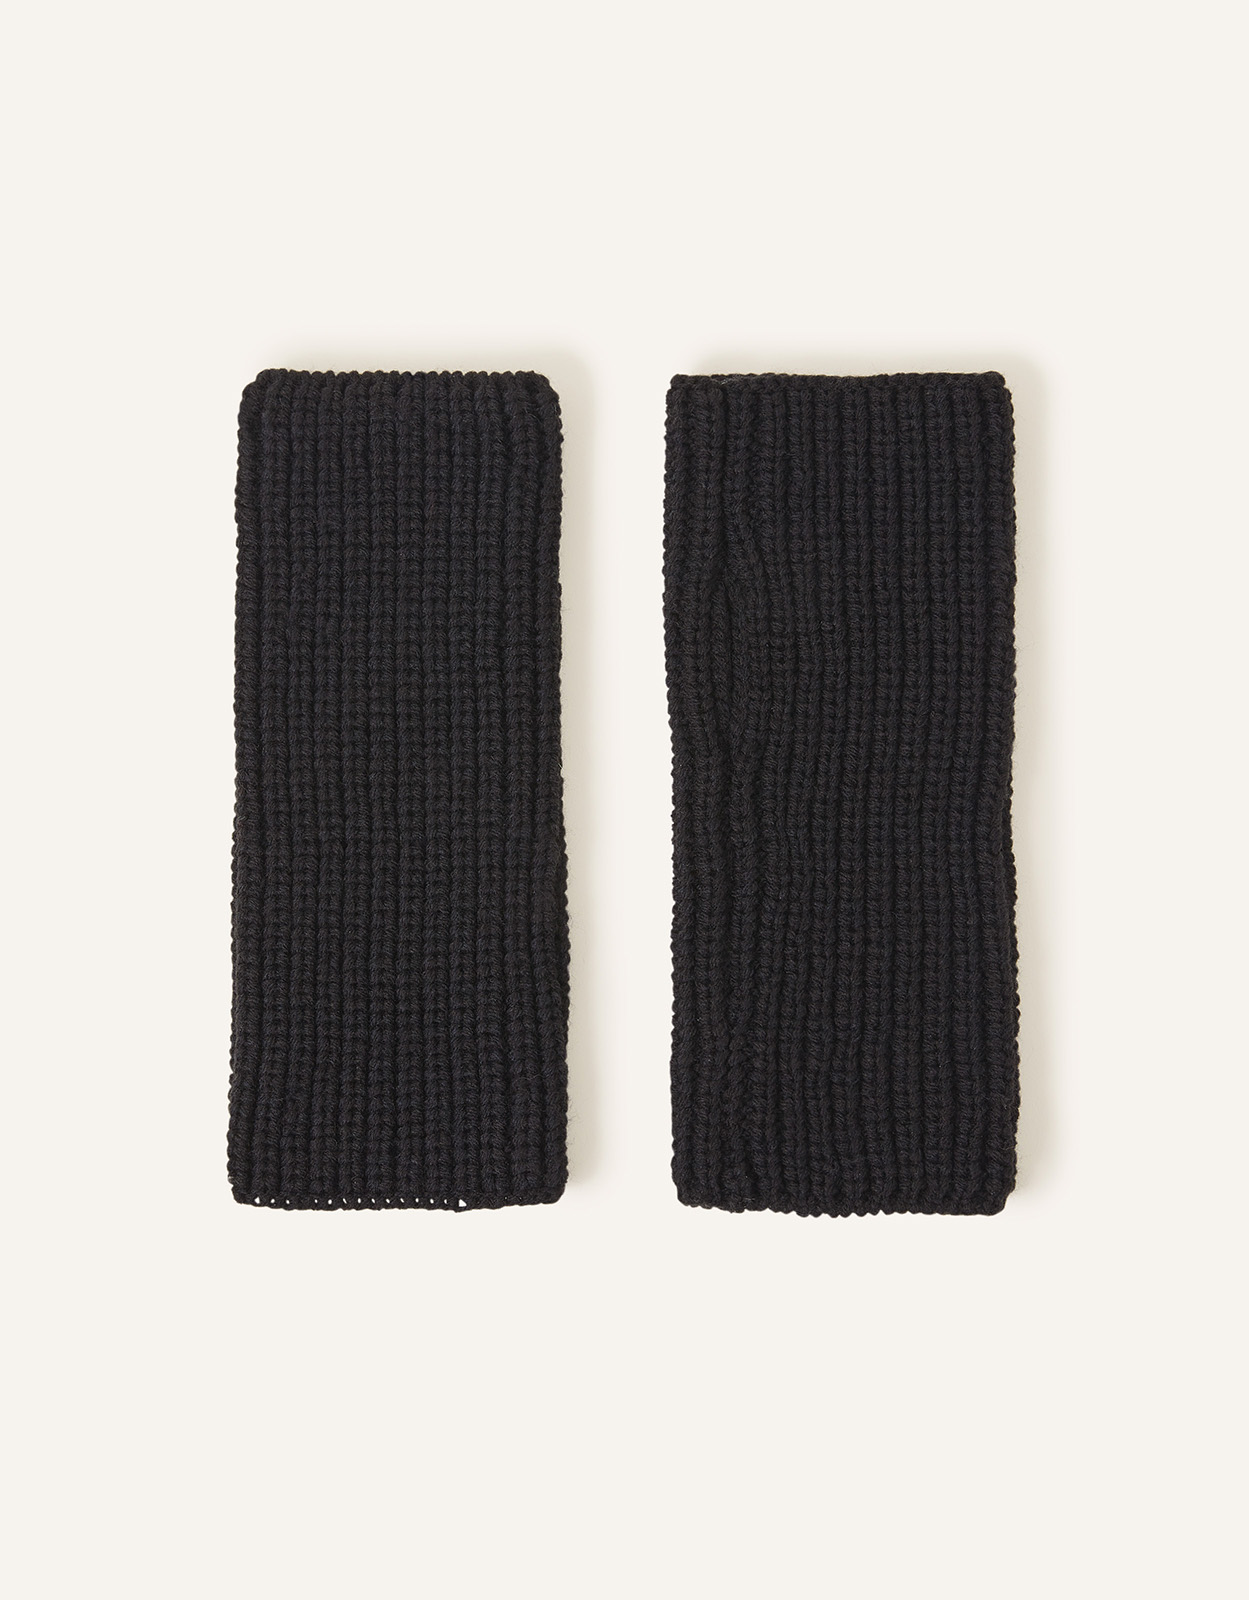 Accessorize Ribbed Cut Off Gloves Black, Size: 8x21cm